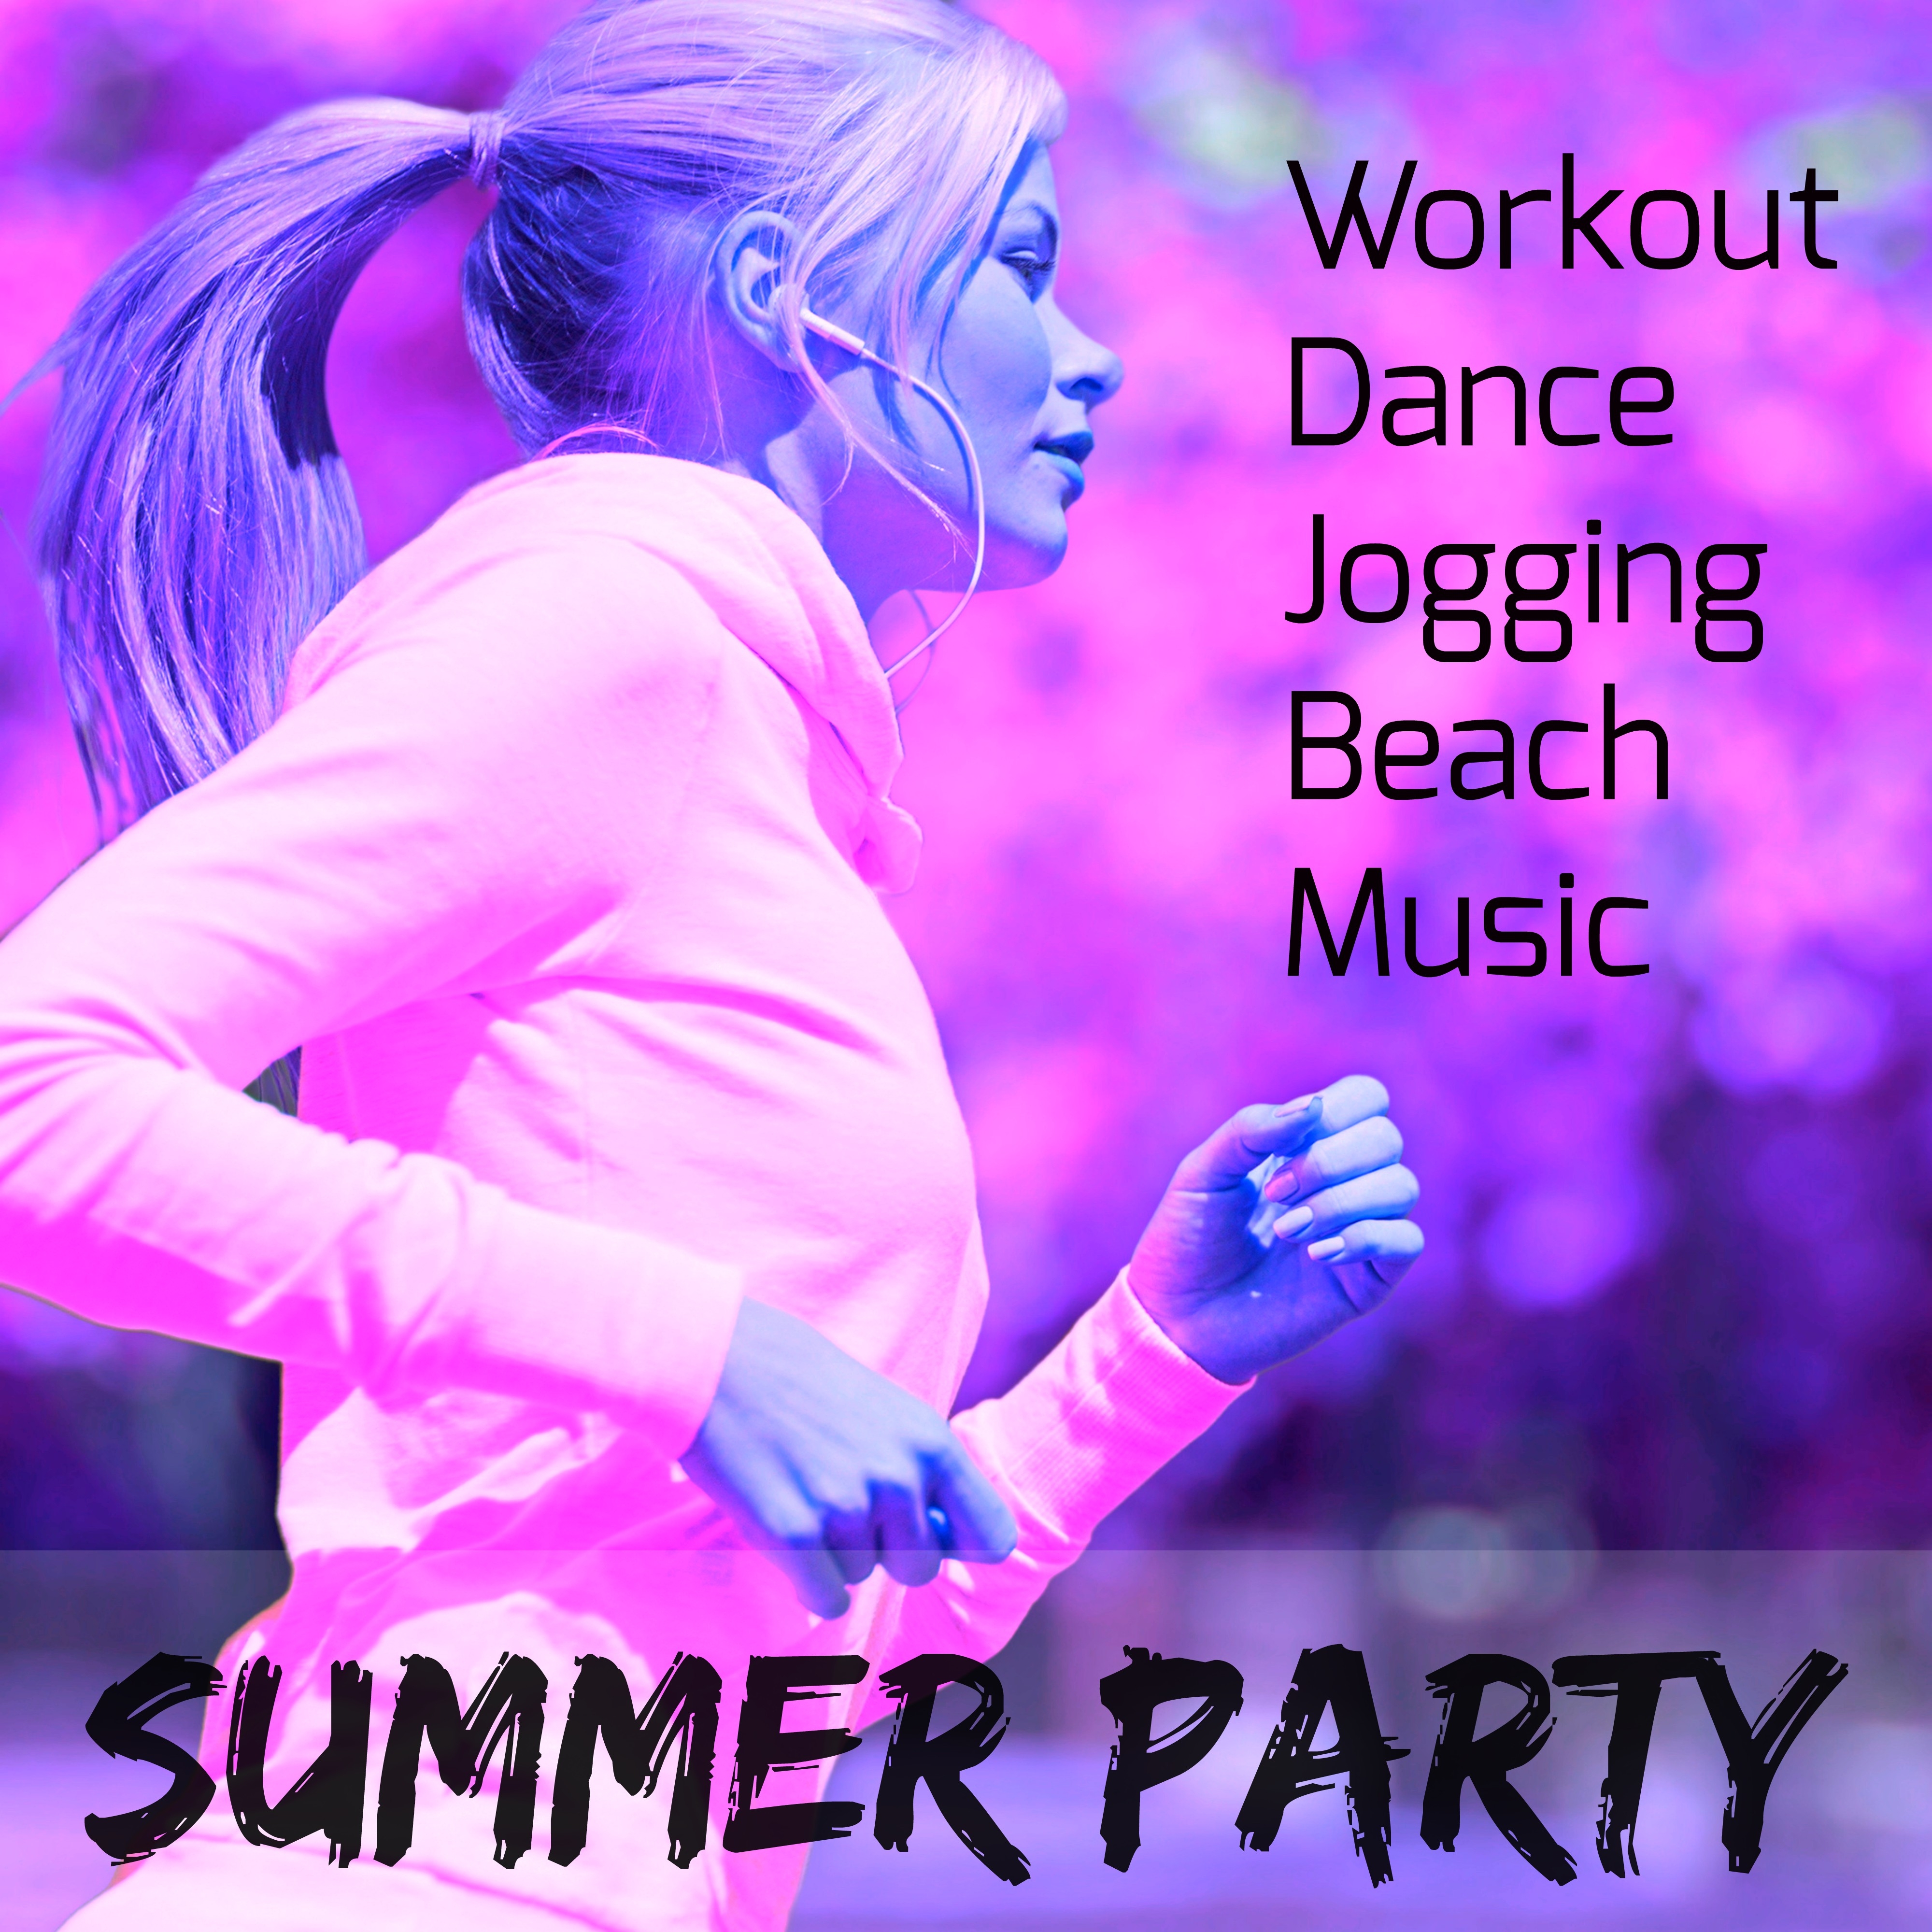 Summer Party - Workout Dance Jogging Beach Music with Deep House Dubstep Electro Techno Sounds